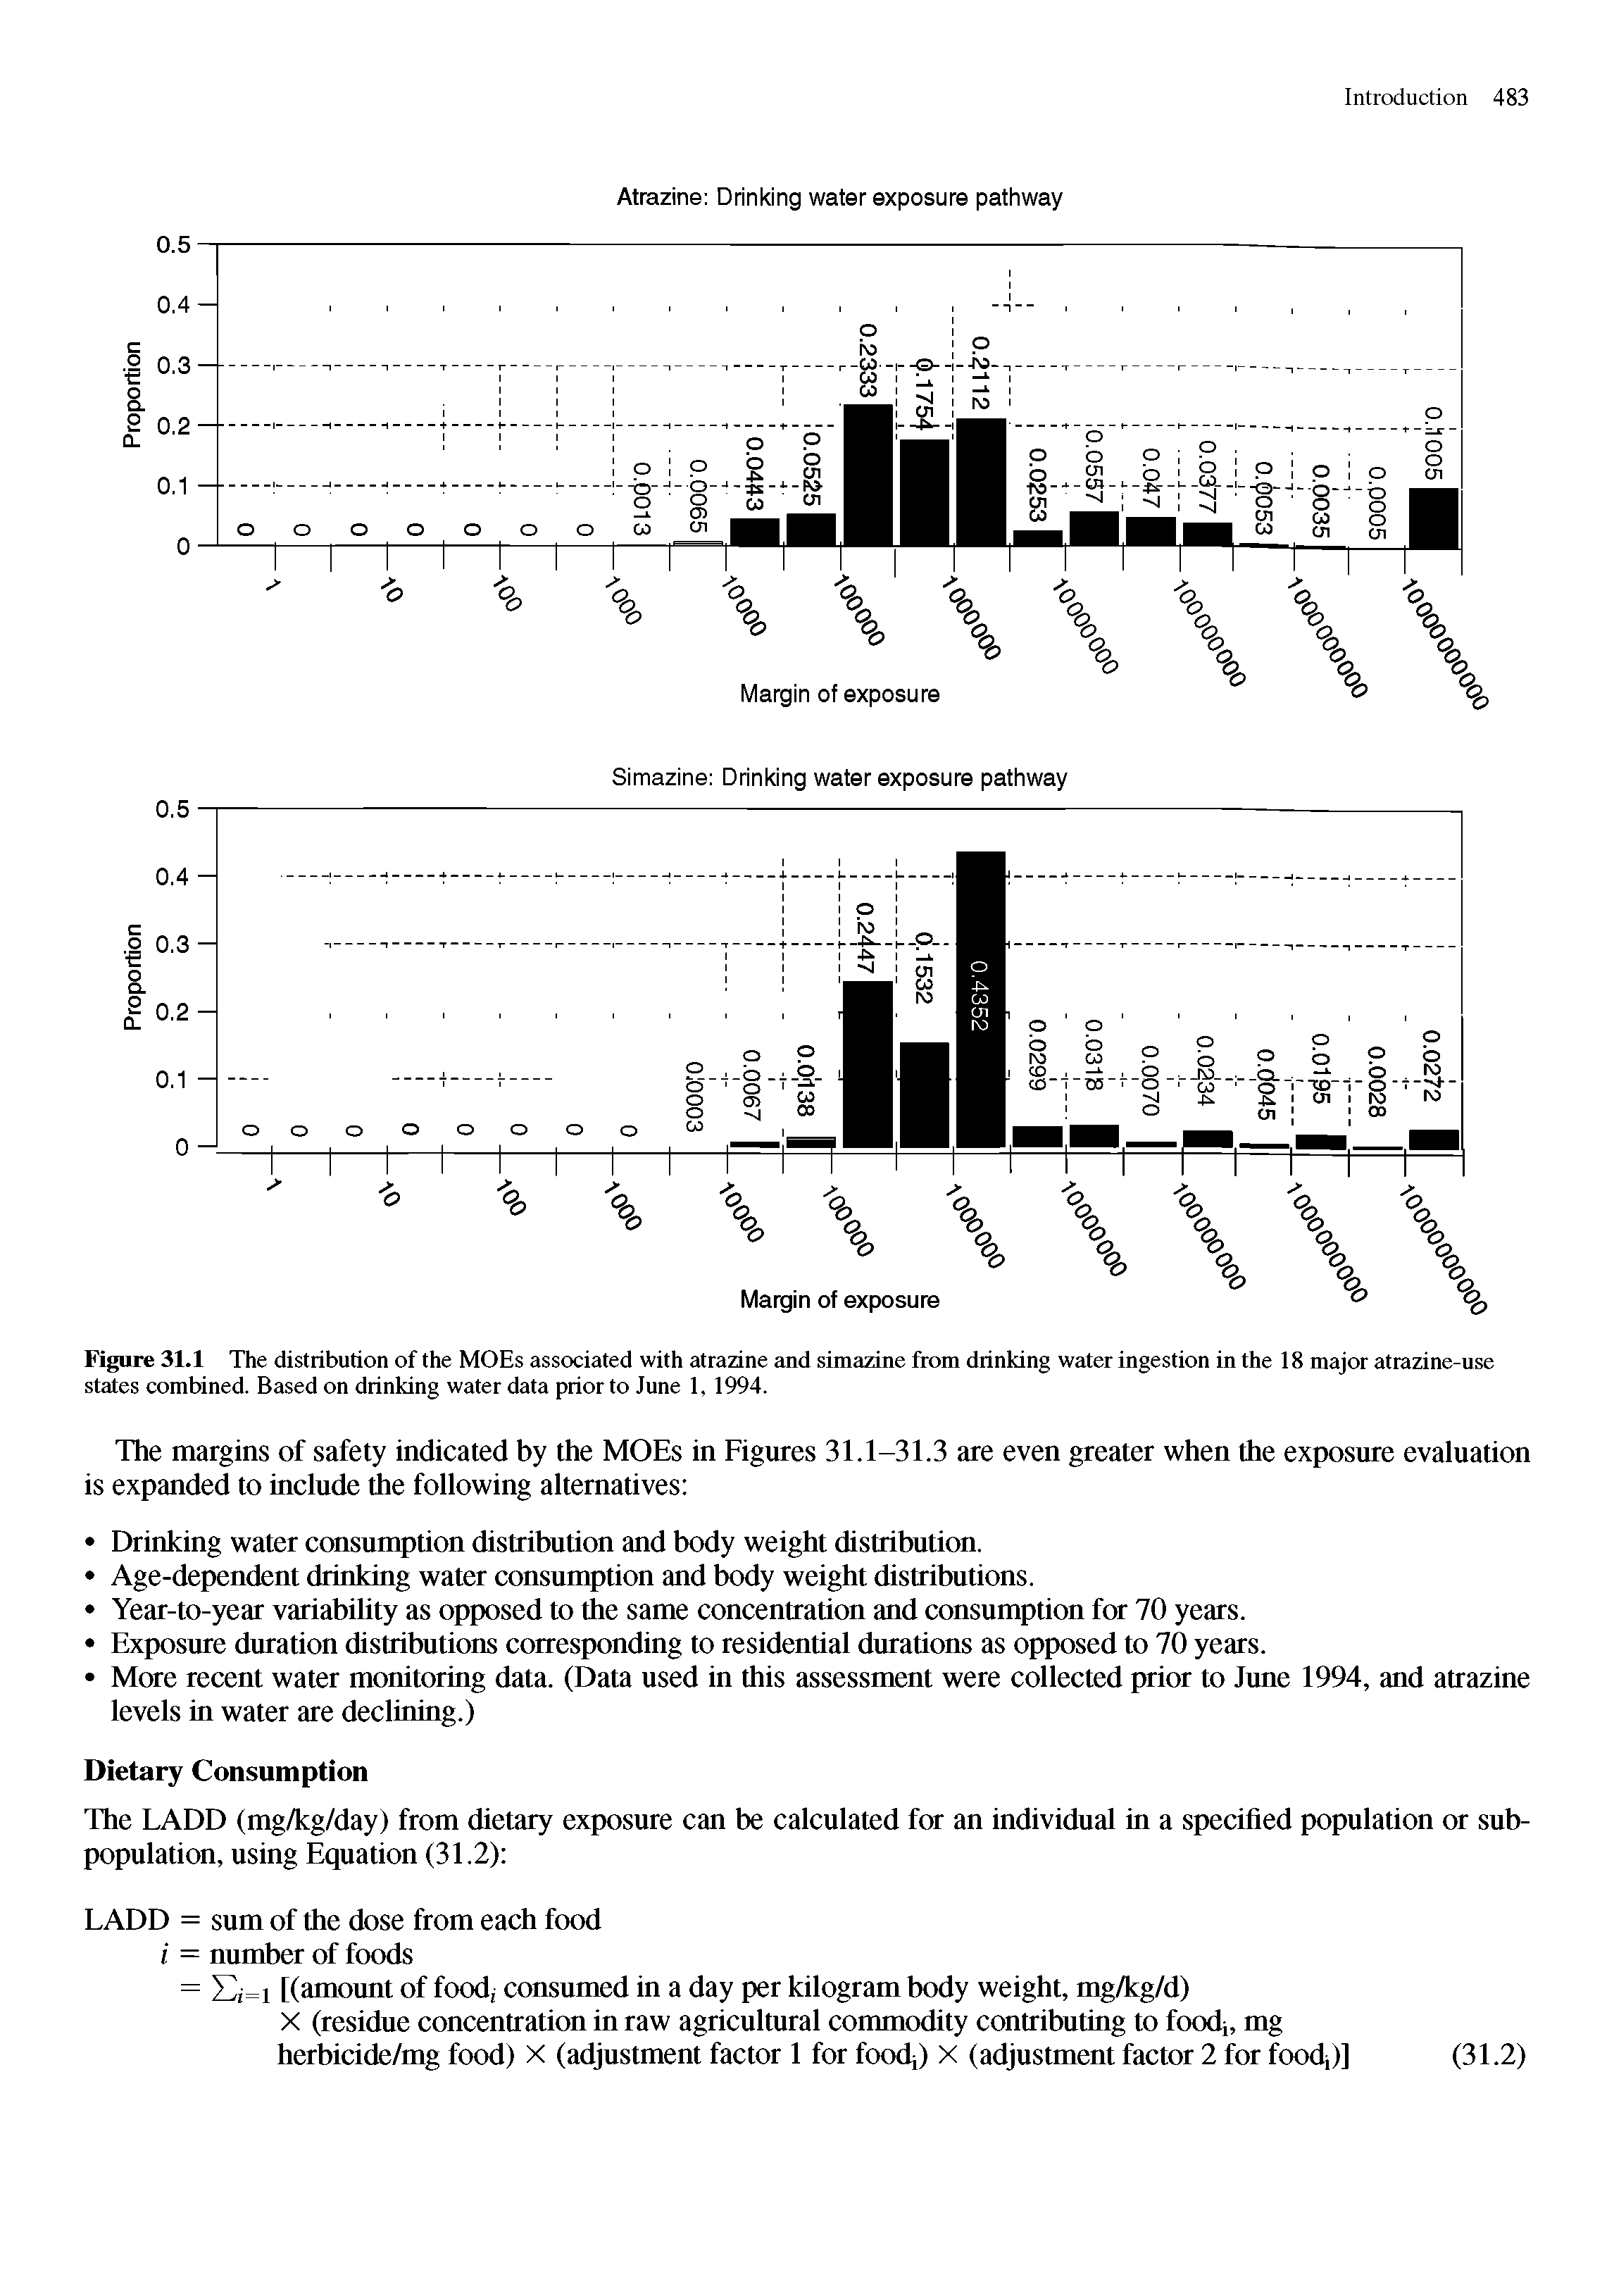 Figure 31.1 The distribution of the MOEs associated with atrazine and simazine from drinking water ingestion in the 18 major atrazine-use states combined. Based on drinking water data prior to June 1, 1994.